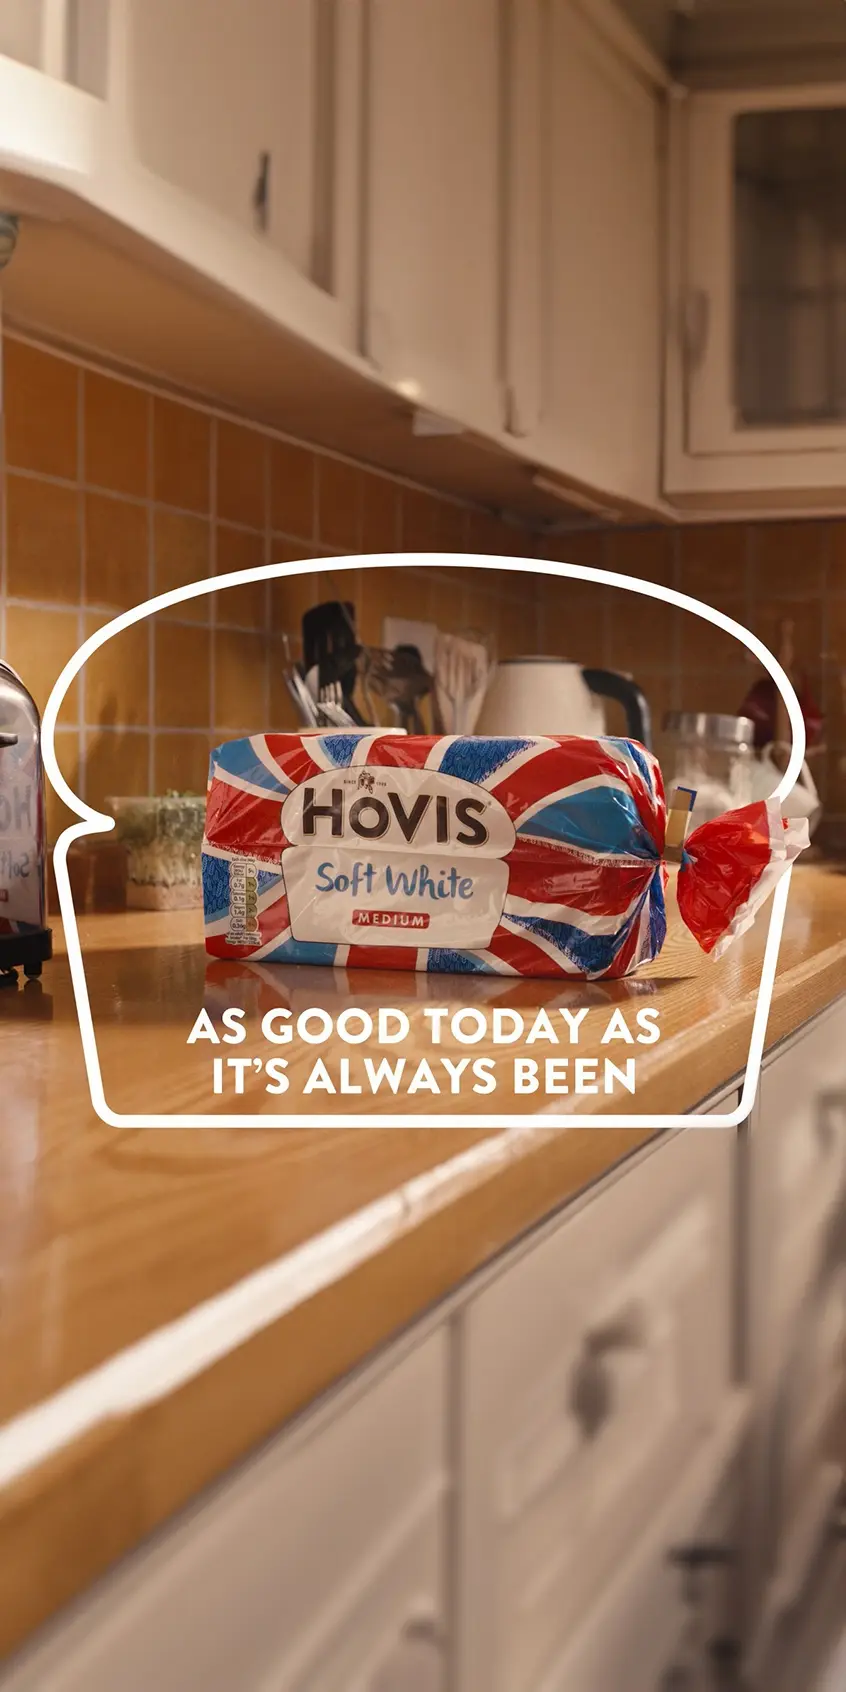 Hovis - Food For Life Since 1866